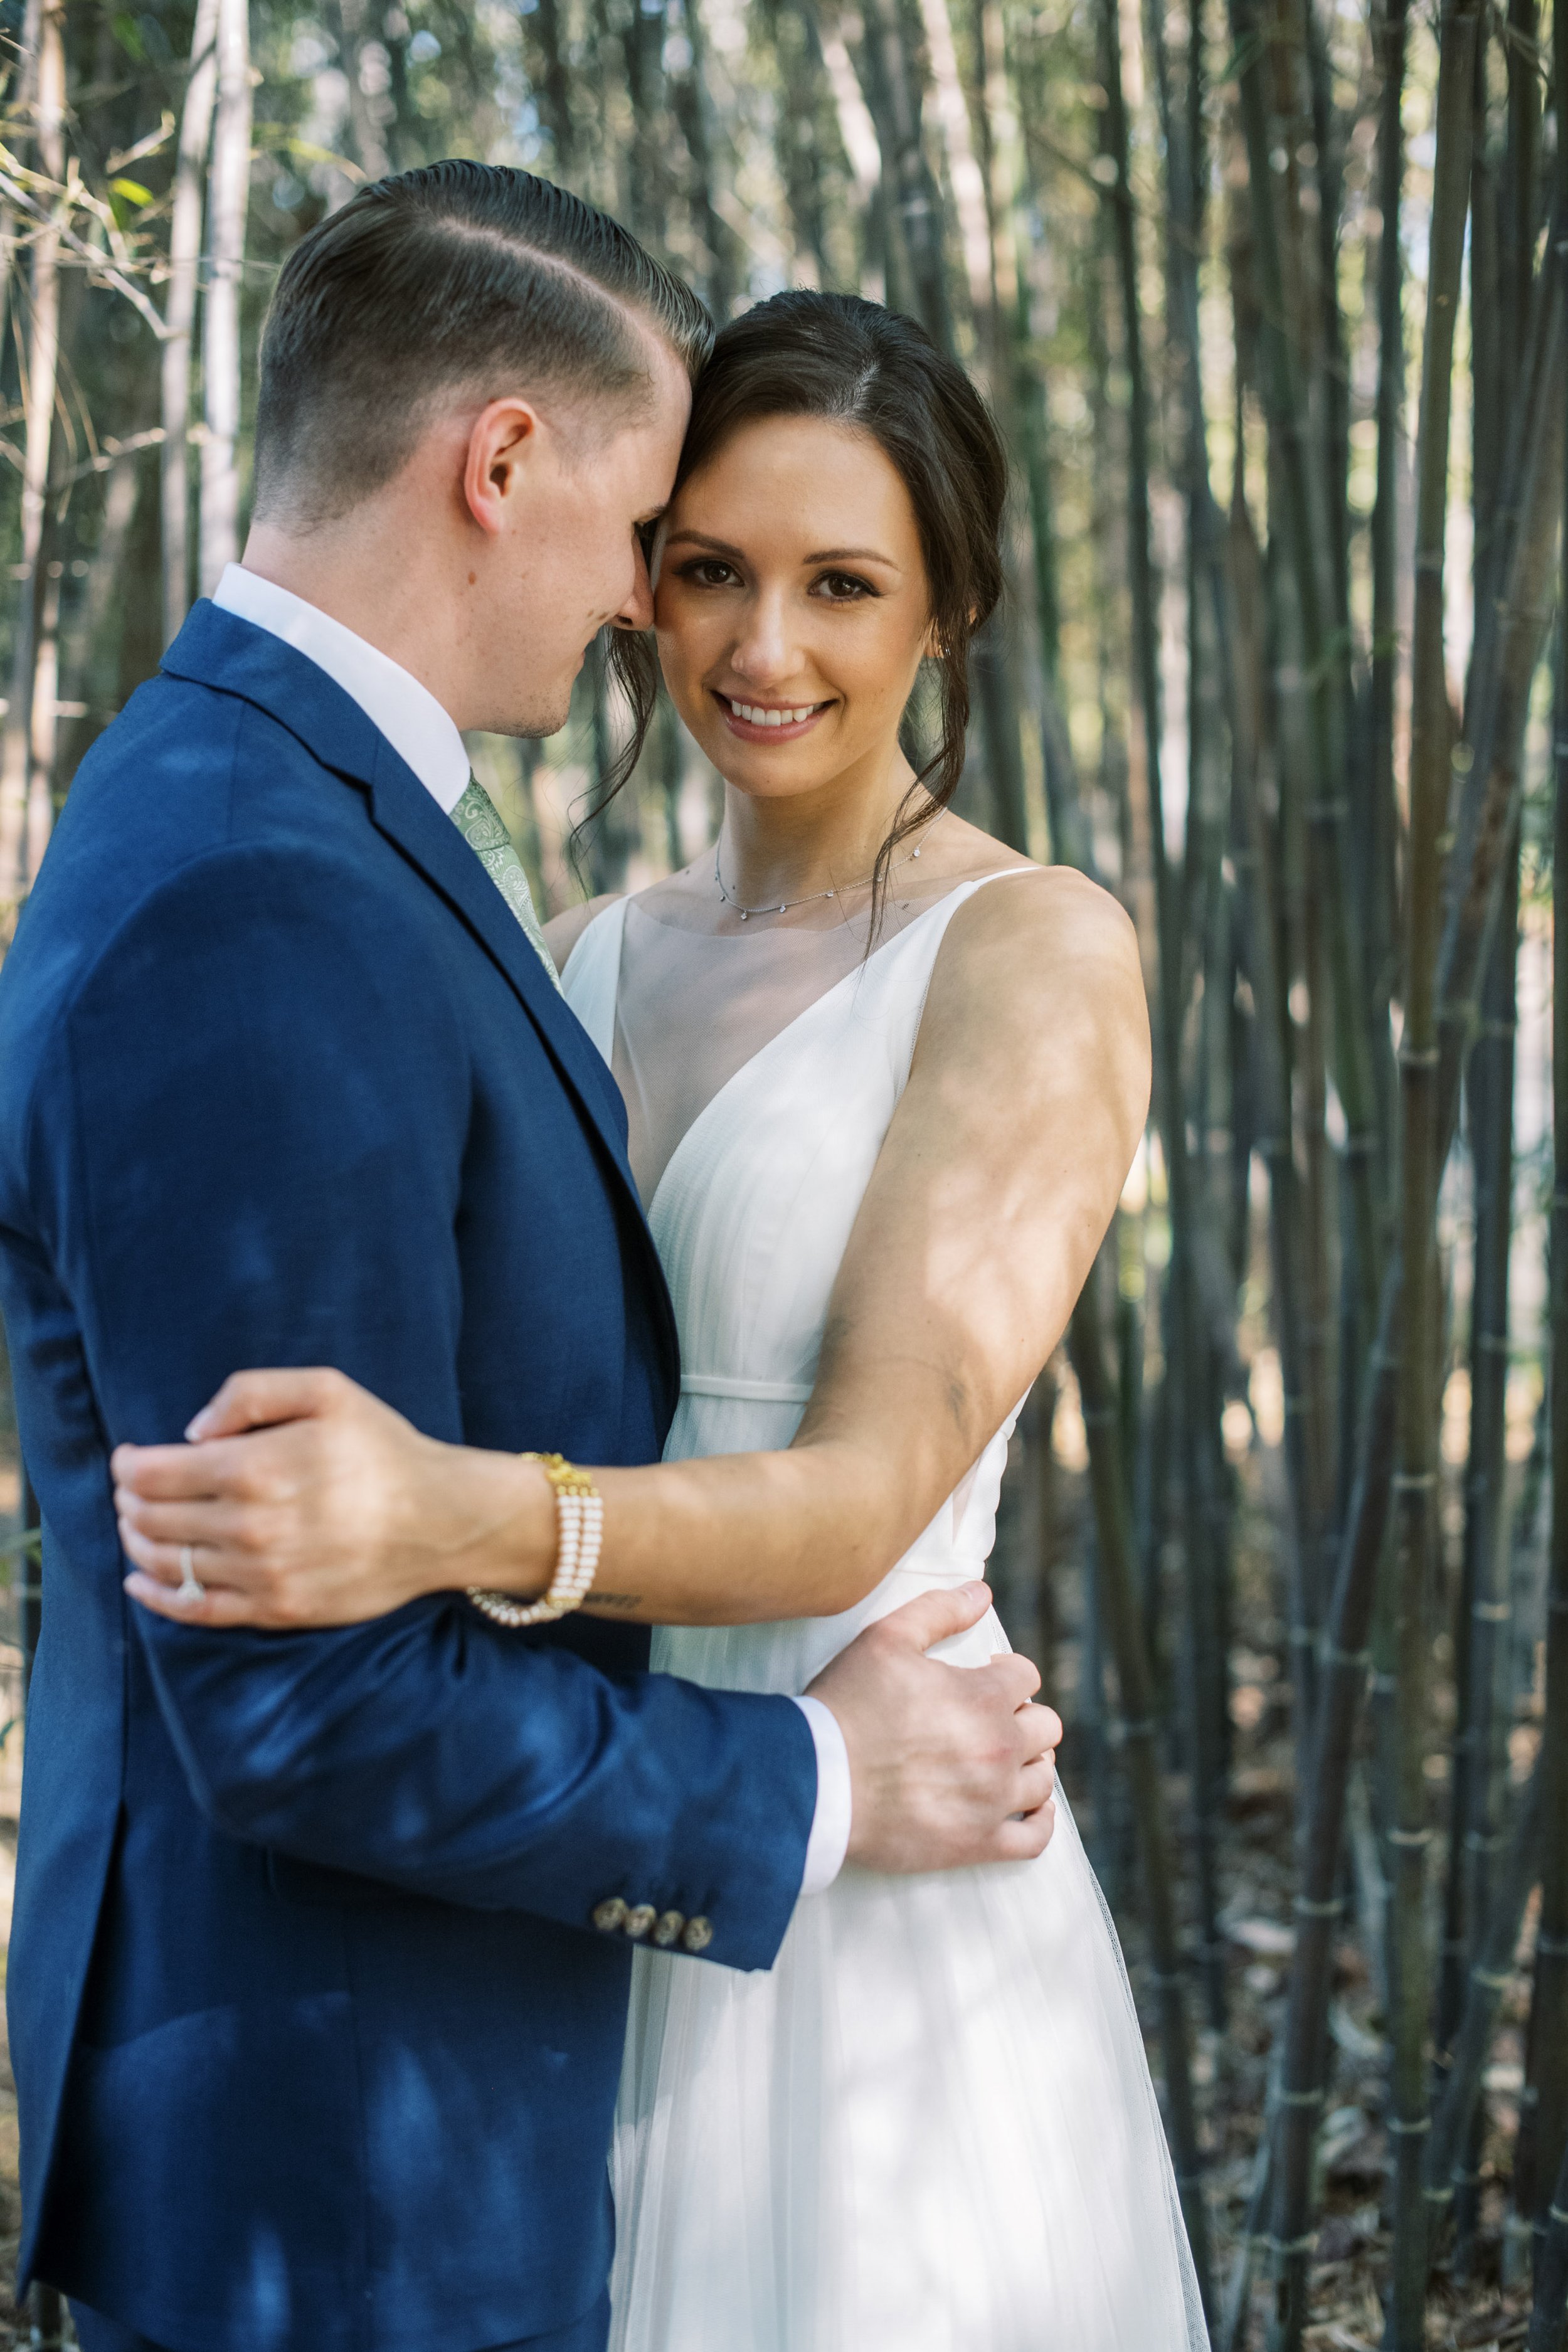 Flirty Bride and Groom in Bamboo Trees Cape Fear Botanical Garden Wedding Fancy This Photography